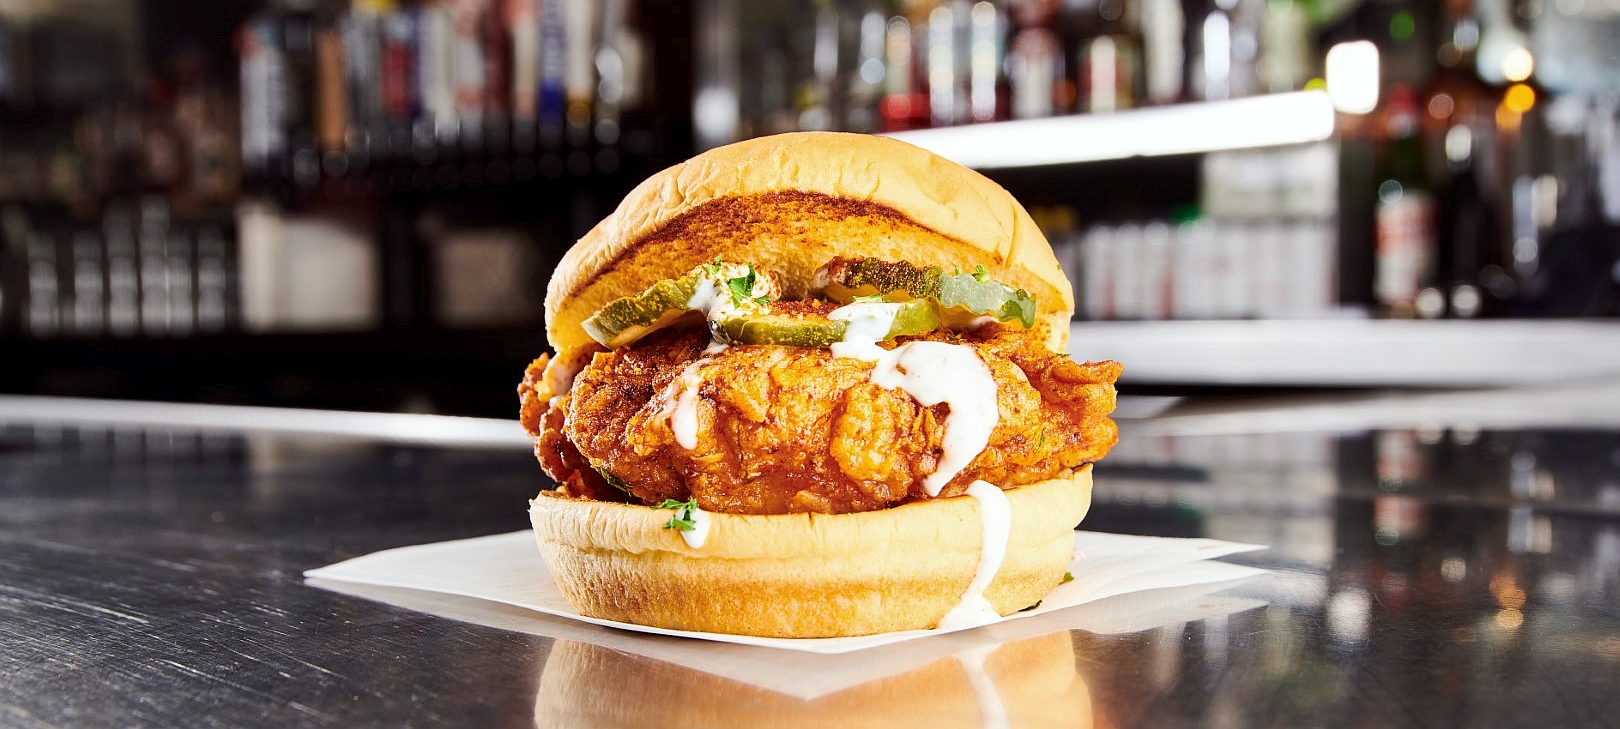 Black Tap Brings the Heat with Its New Hot Chicken Sandwich